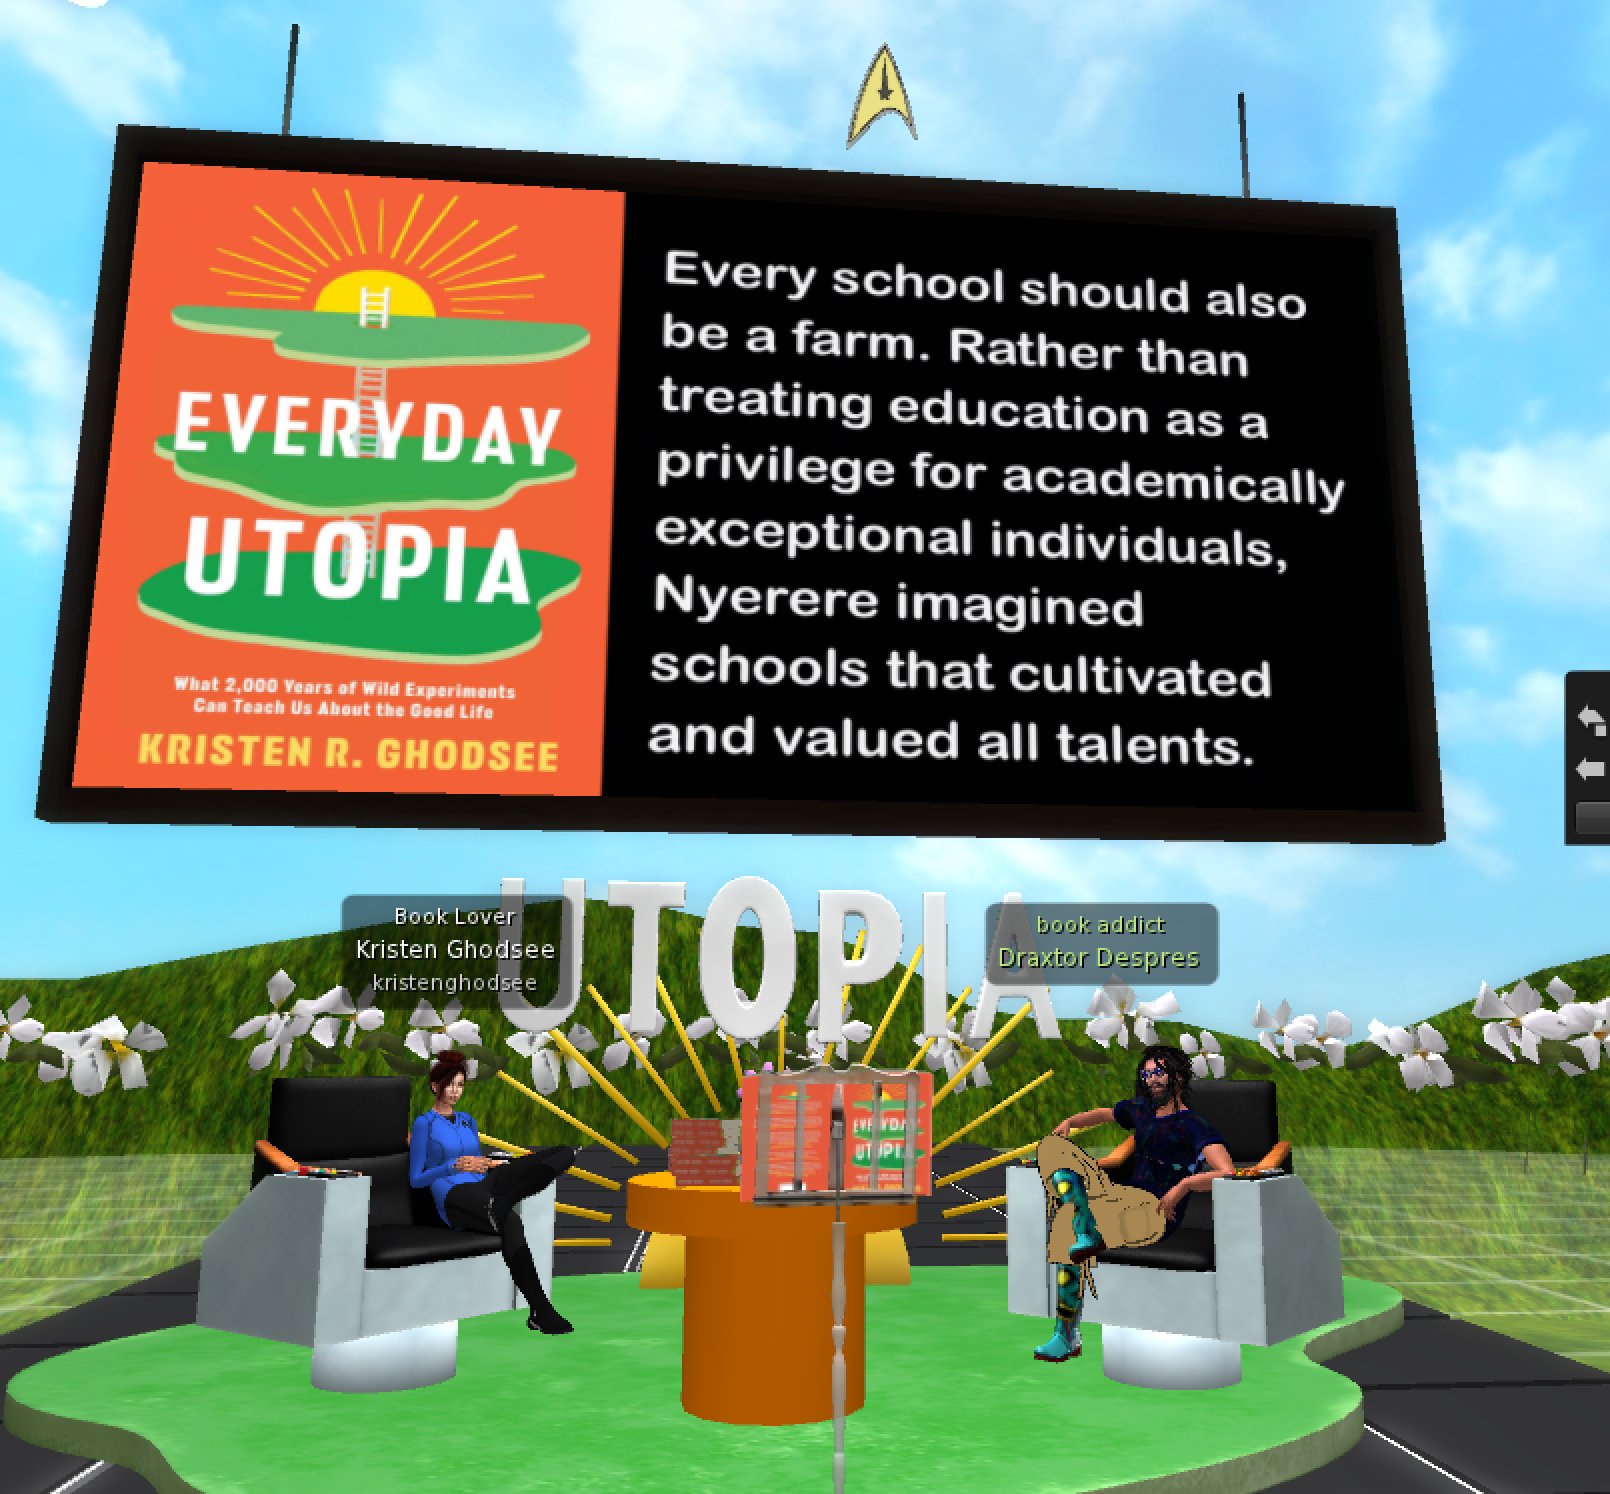 Everyday Utopia, Book by Kristen R. Ghodsee, Official Publisher Page